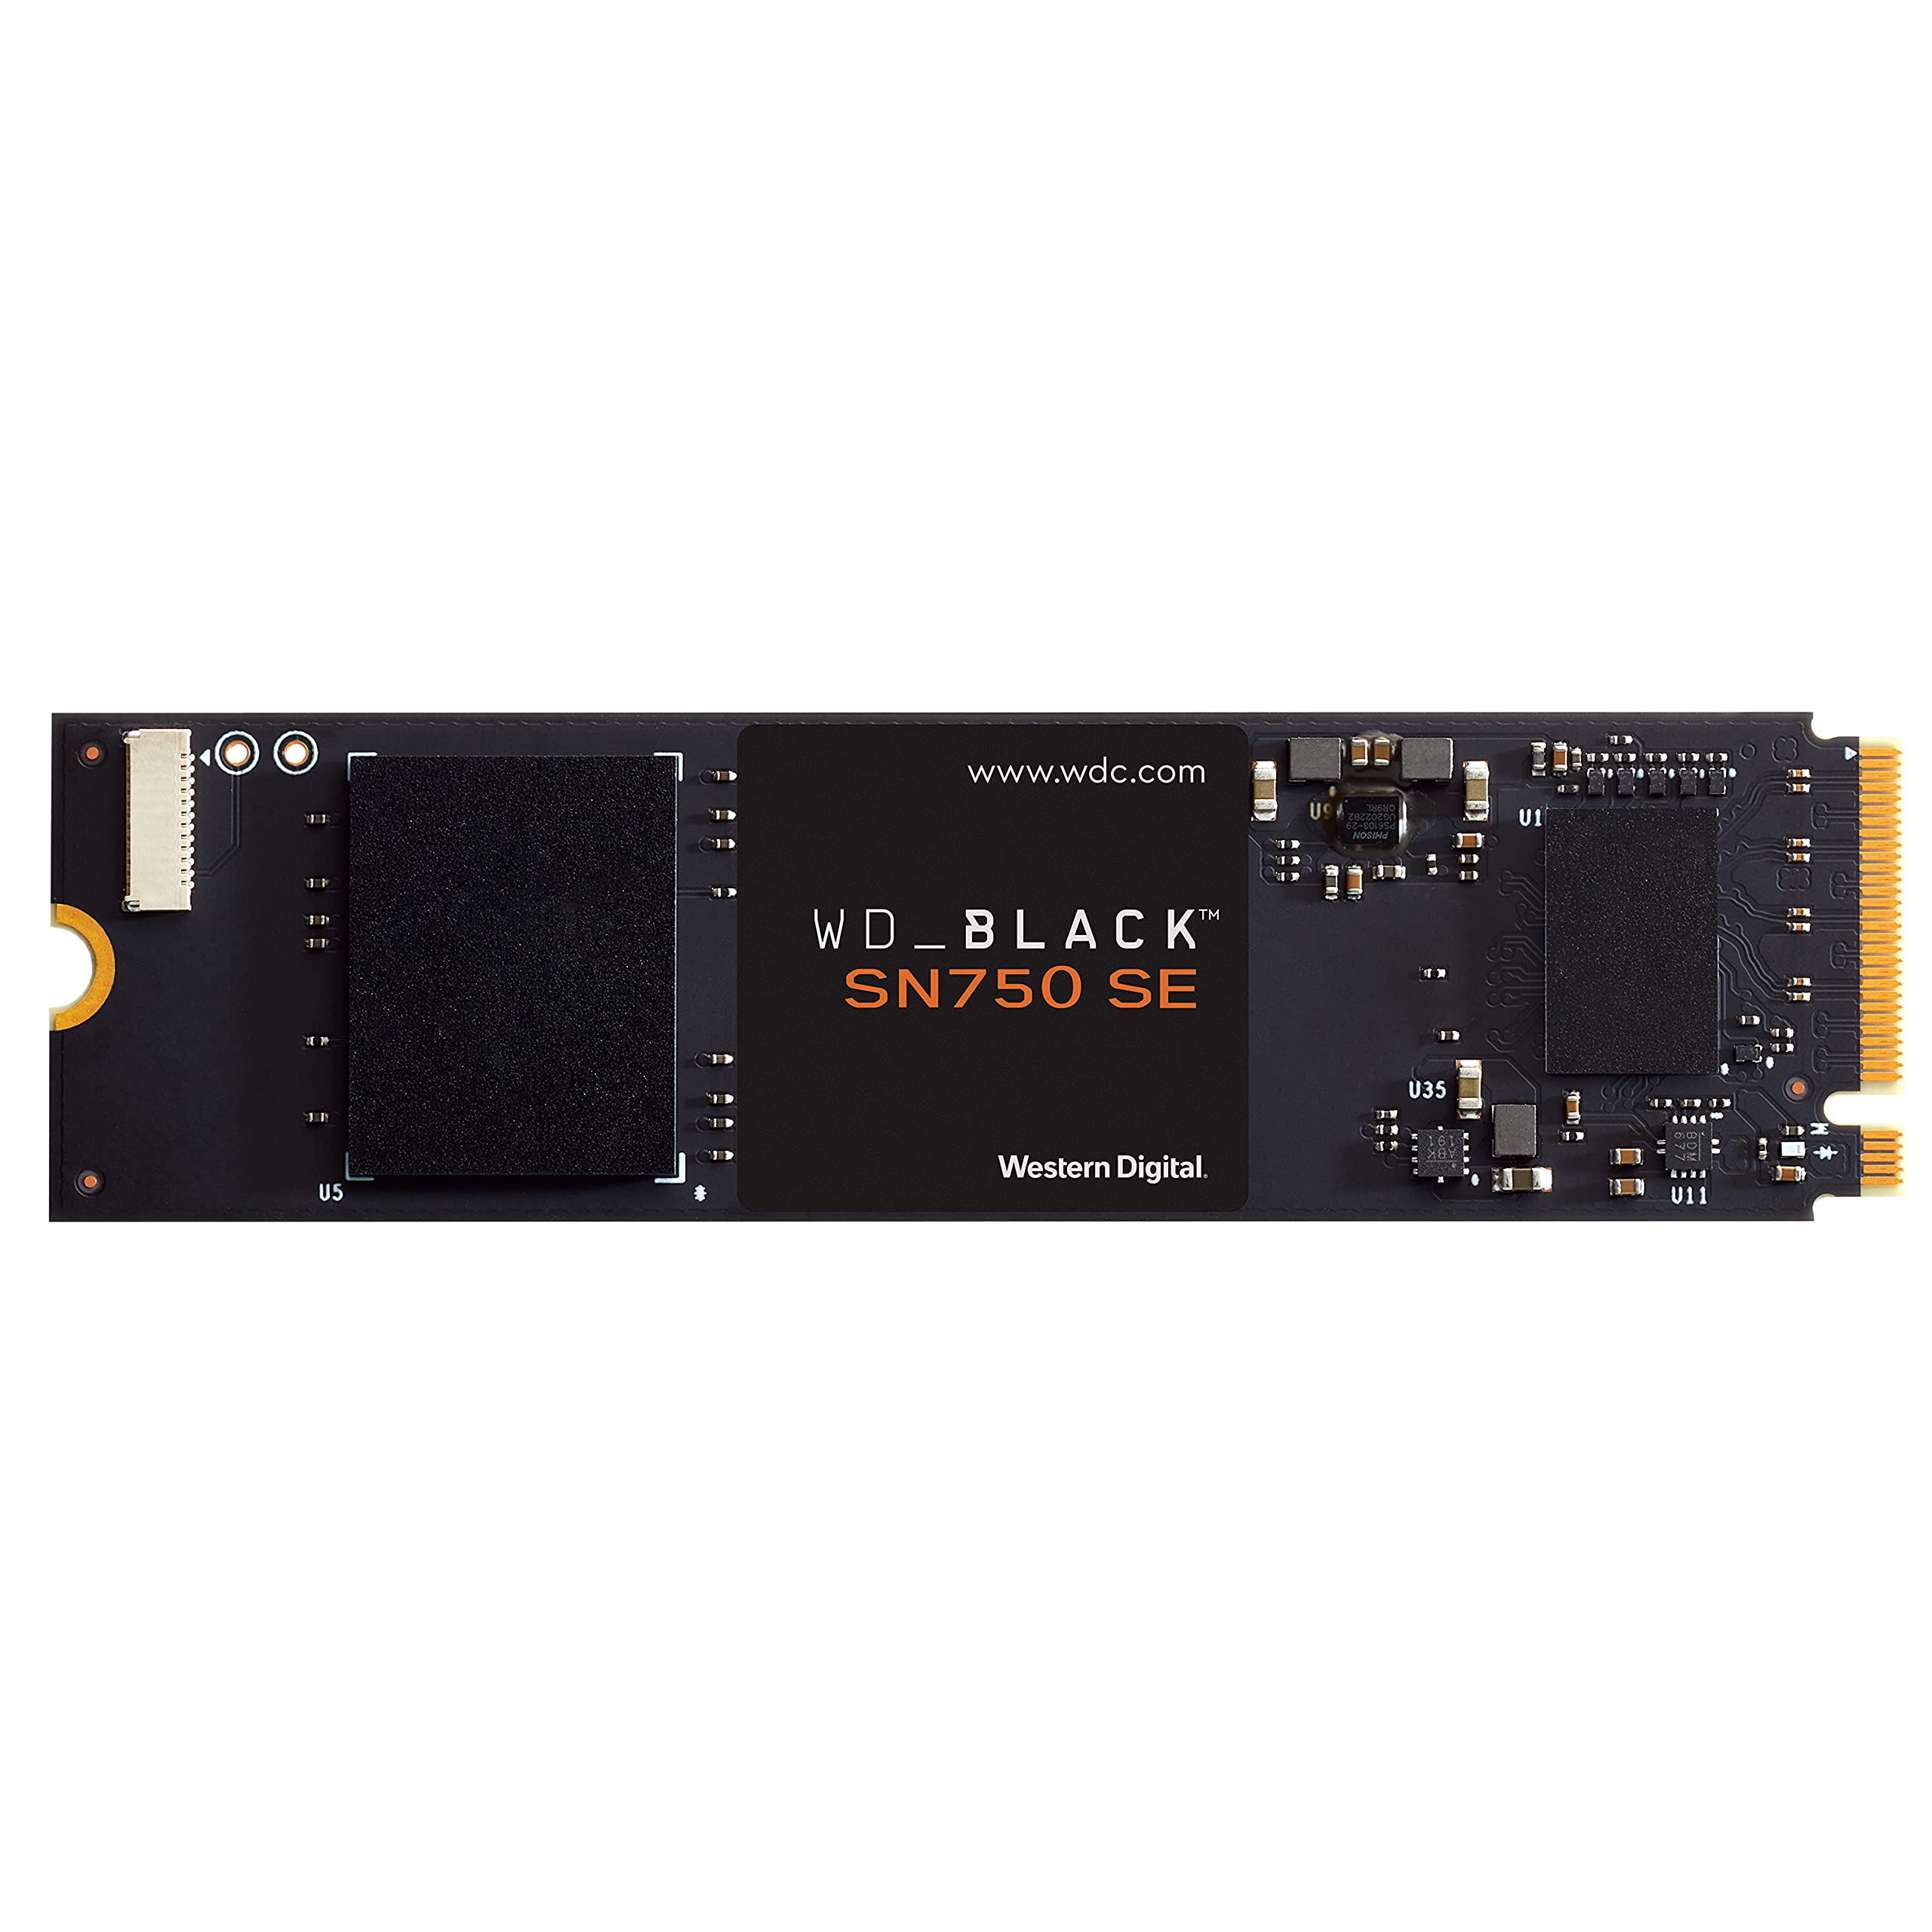 WD_BLACK 250GB SN750 SE NVMe Internal Gaming SSD Solid State Drive - Gen4 PCIe, M.2 2280, Up to 3,600 MB/s - WDS250G1B0E